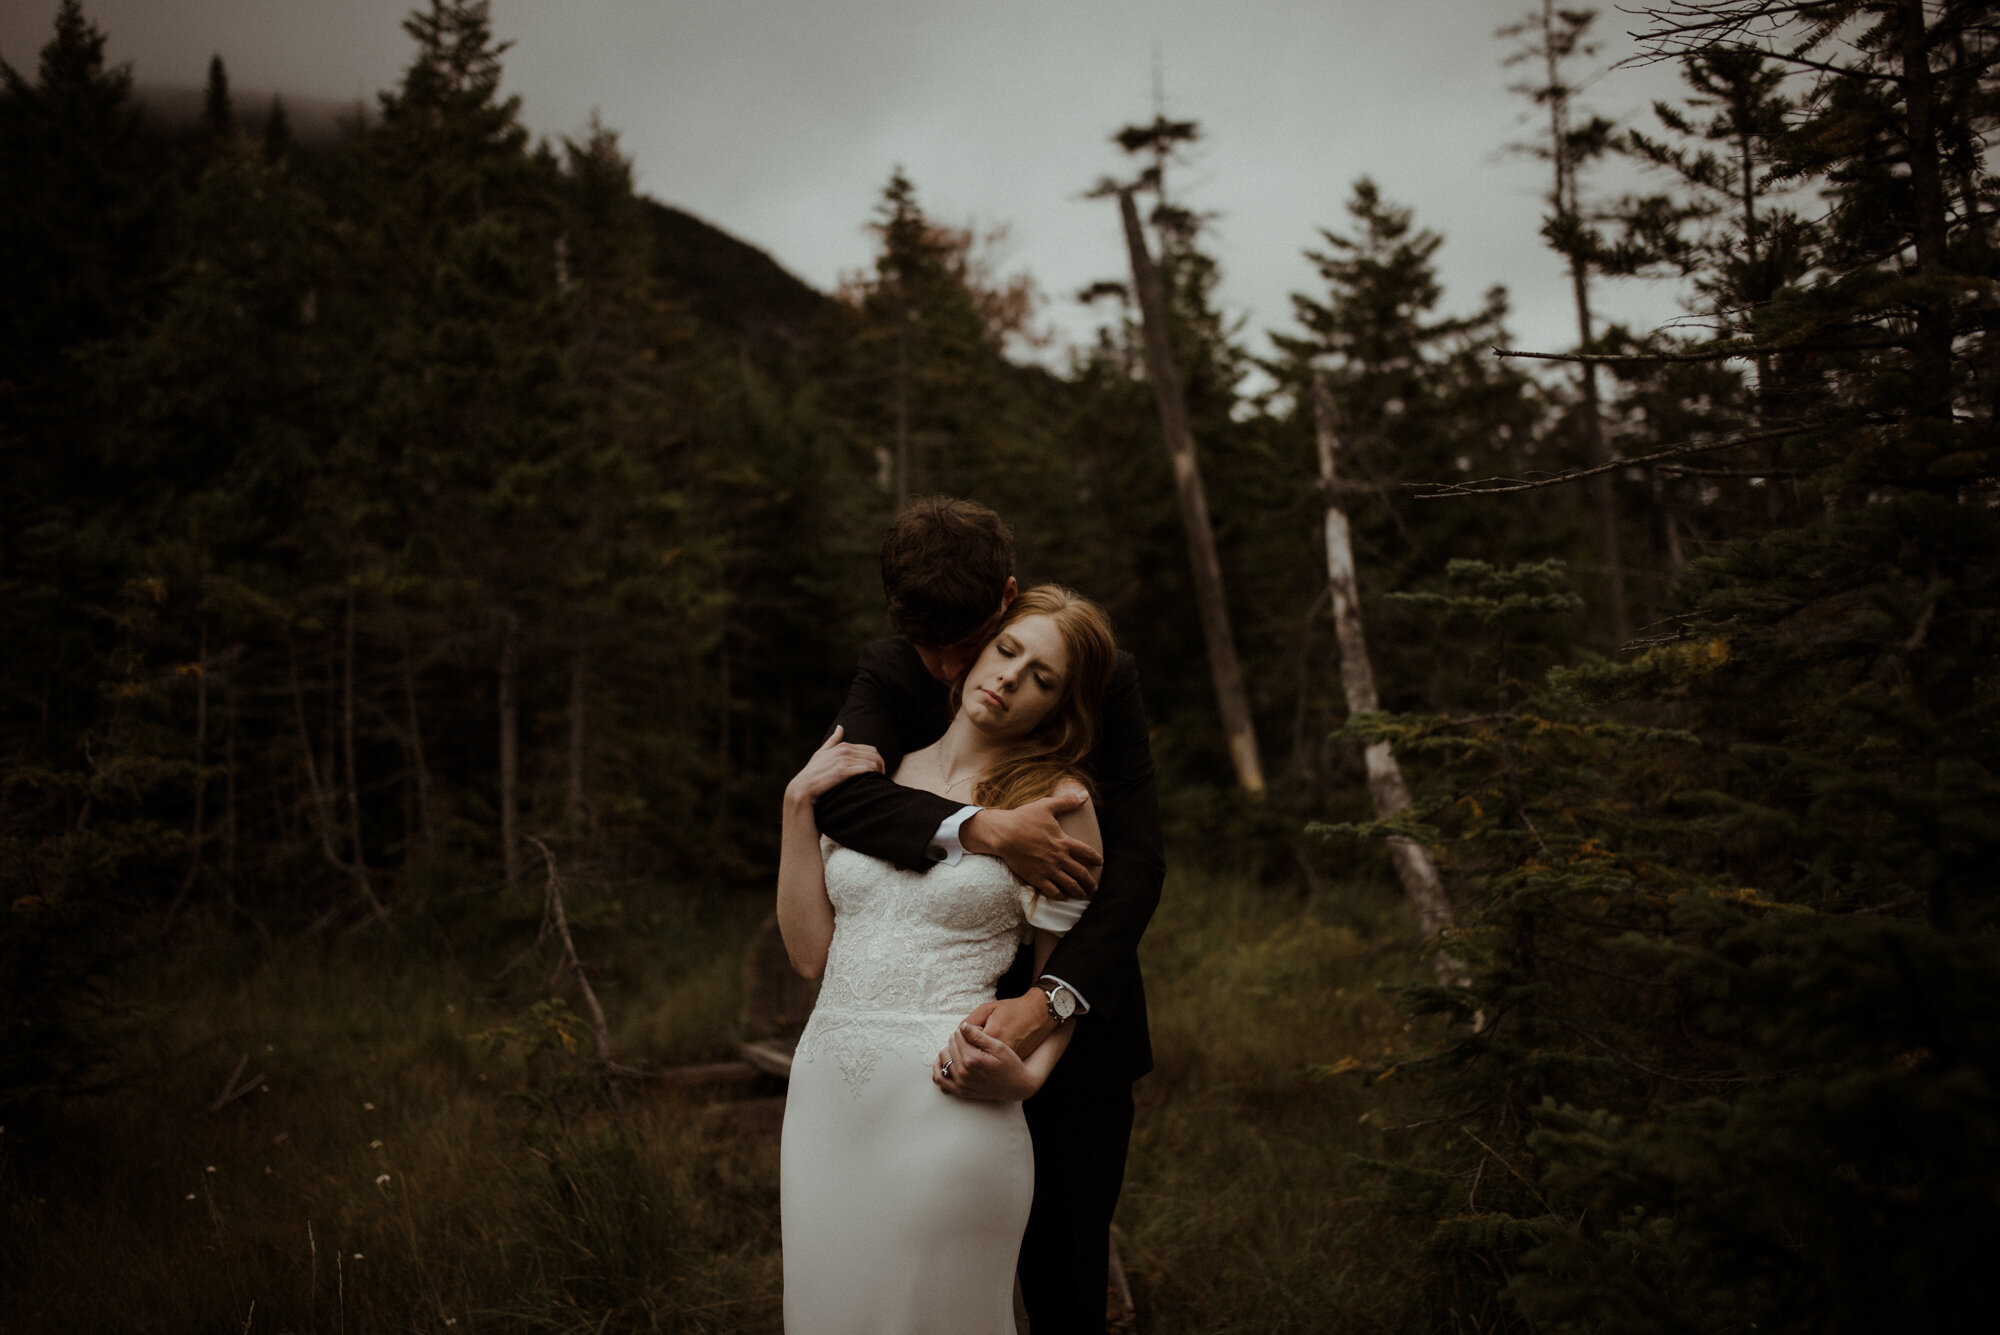 Autumn Elopement in New Hampshire - Backyard Wedding during COVID and Sunrise Hike in Wedding Dress - White Sails Creative_111.jpg